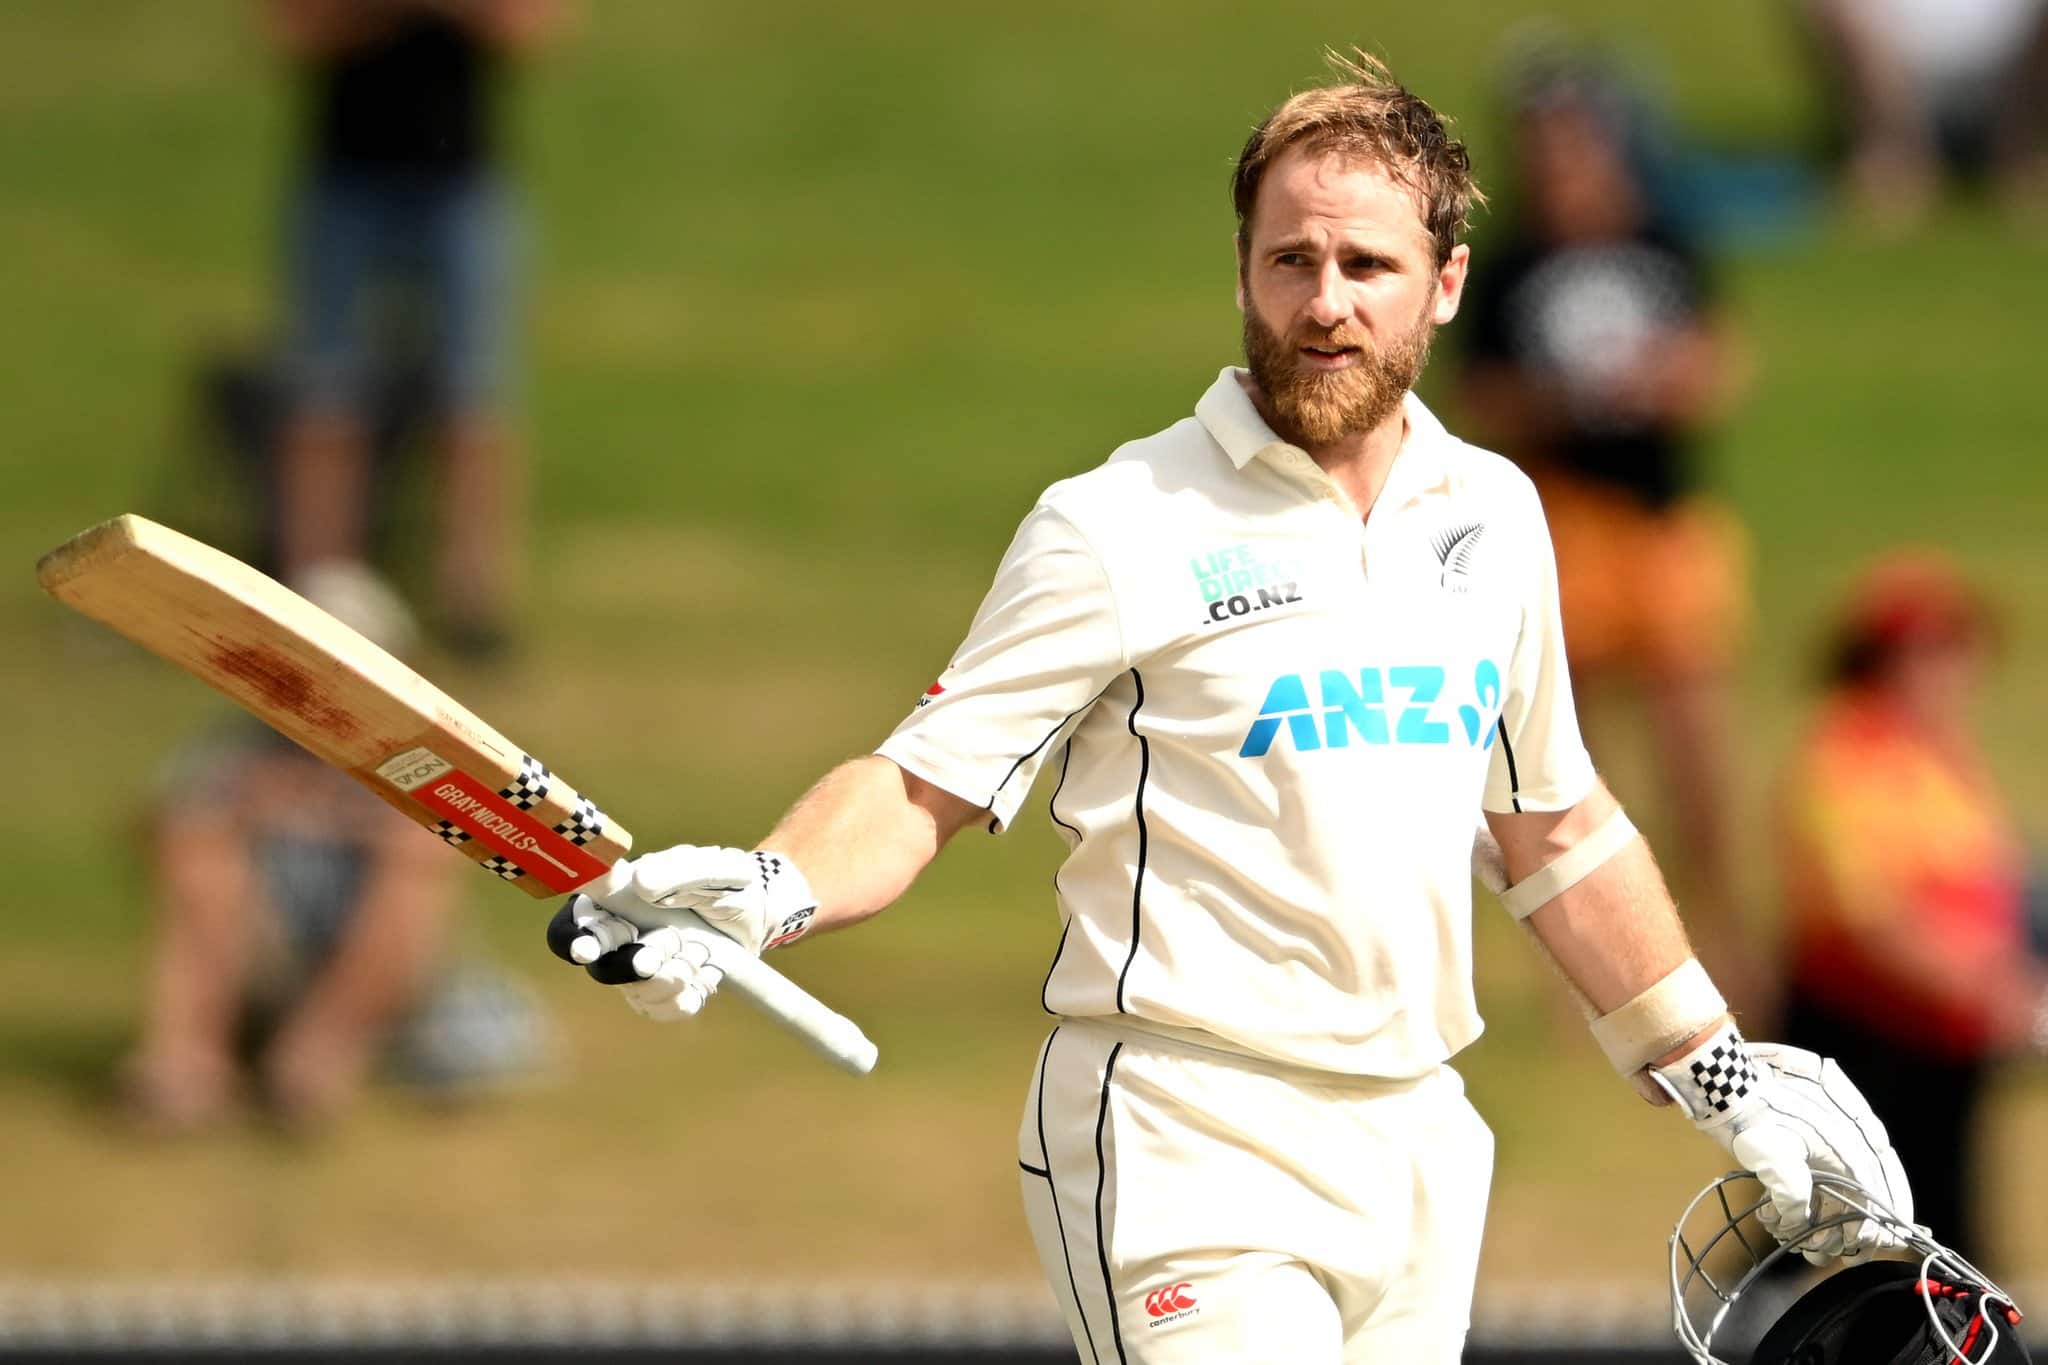 Kane Williamson will be a key player for New Zealand in his 100th Test (Source: x.com)